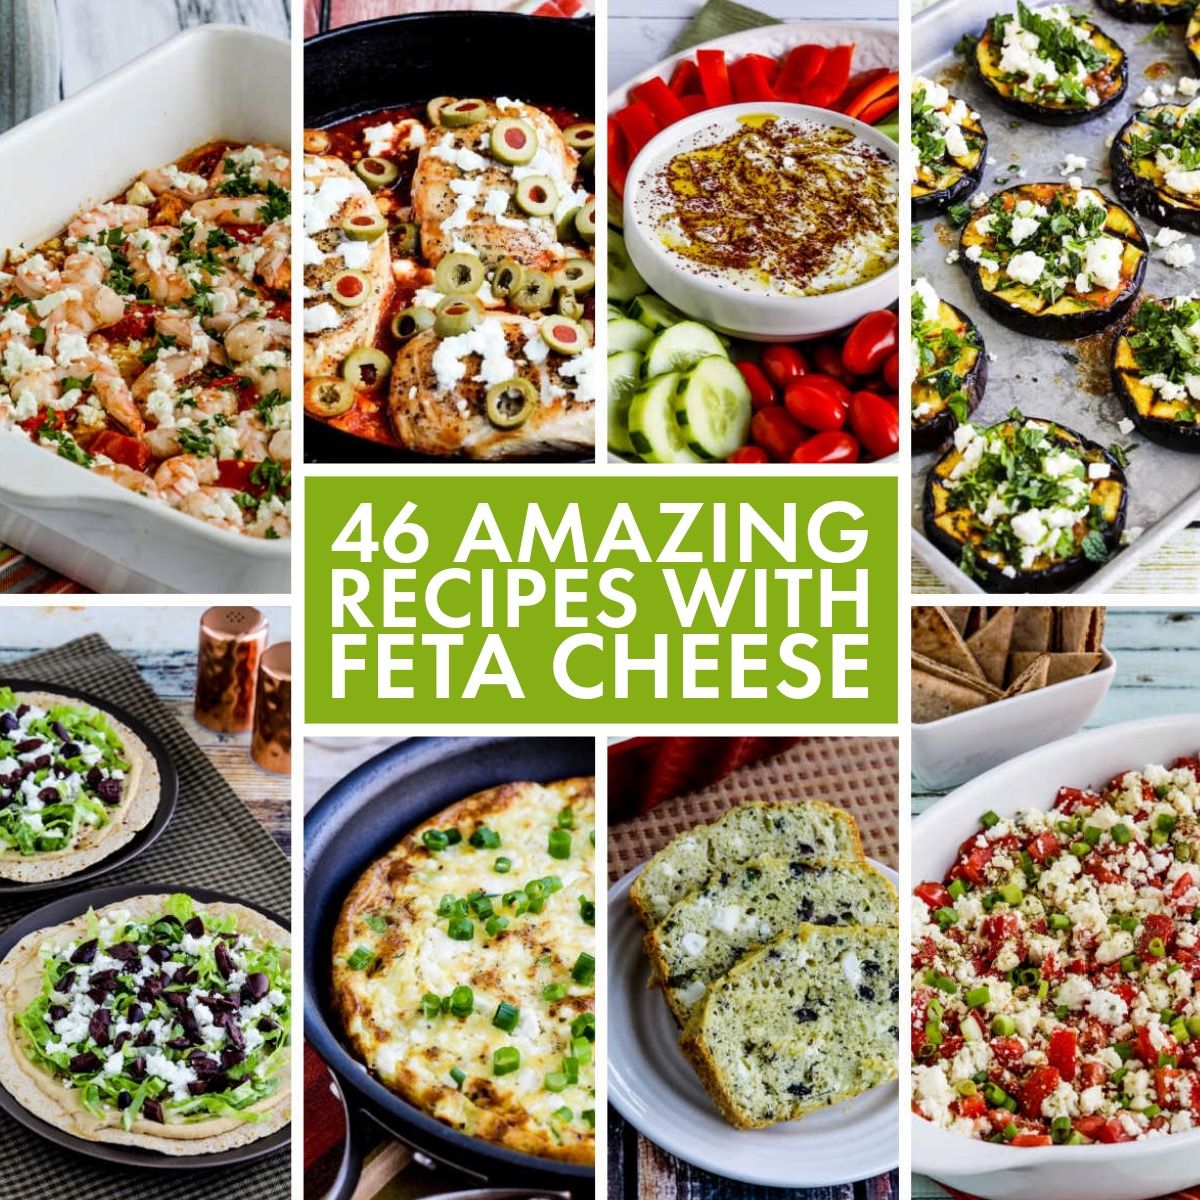 46 Amazing Recipes with Feta Cheese text overlay collage showing featured recipes.